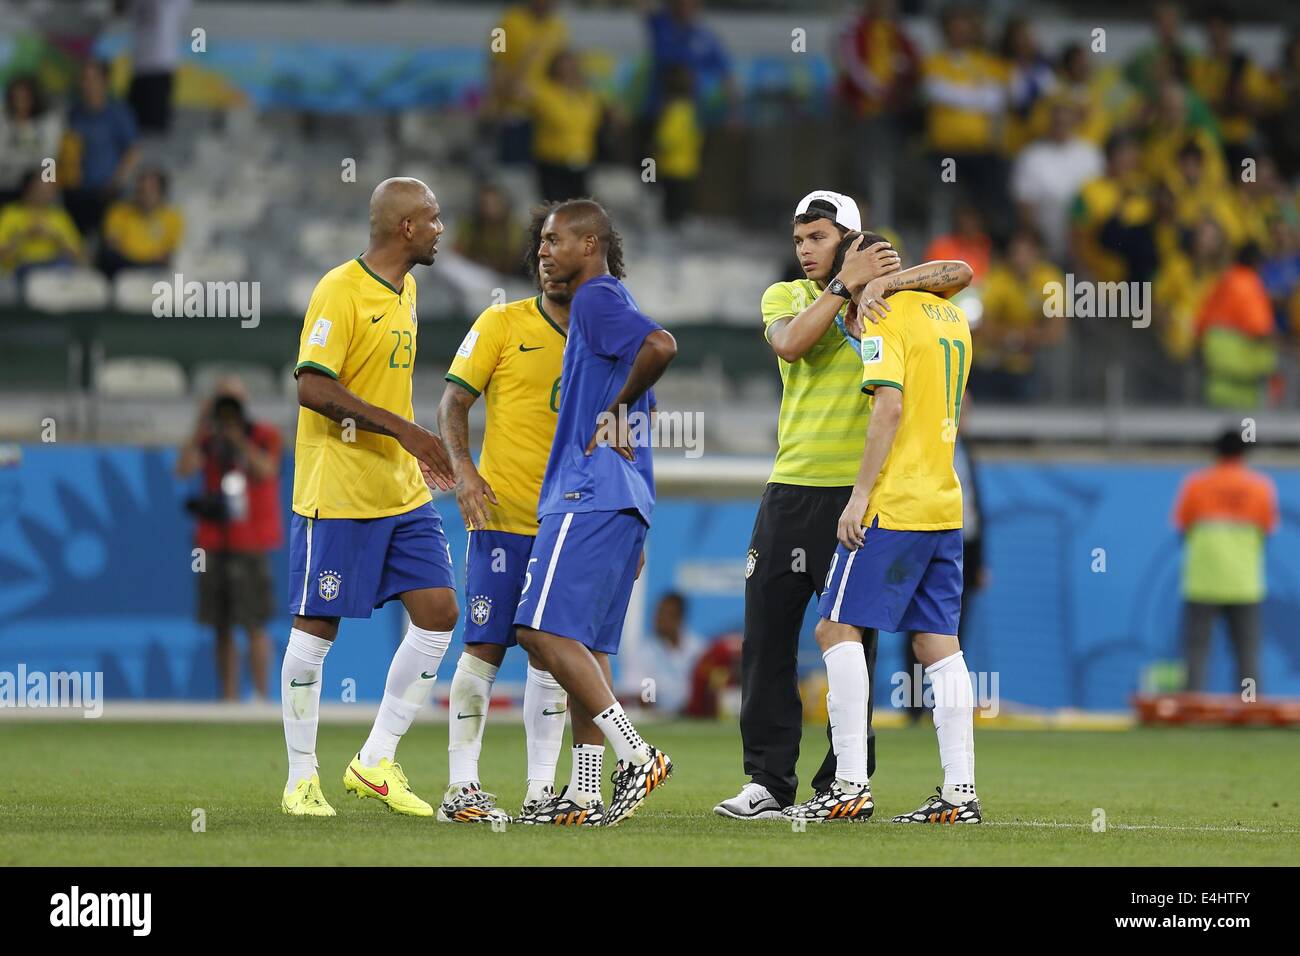 (L-R) Maicon, Fernandinho, Thiago Silva, Oscar (BRA), JULY 8, 2014 - Football / Soccer : Brazilian players look dejected after losing the FIFA World Cup 2014 semifinal match between Brazil and Germany at the Estadio Mineirao in Belo Horizonte, Brazil. (Photo by AFLO) [3604] Stock Photo